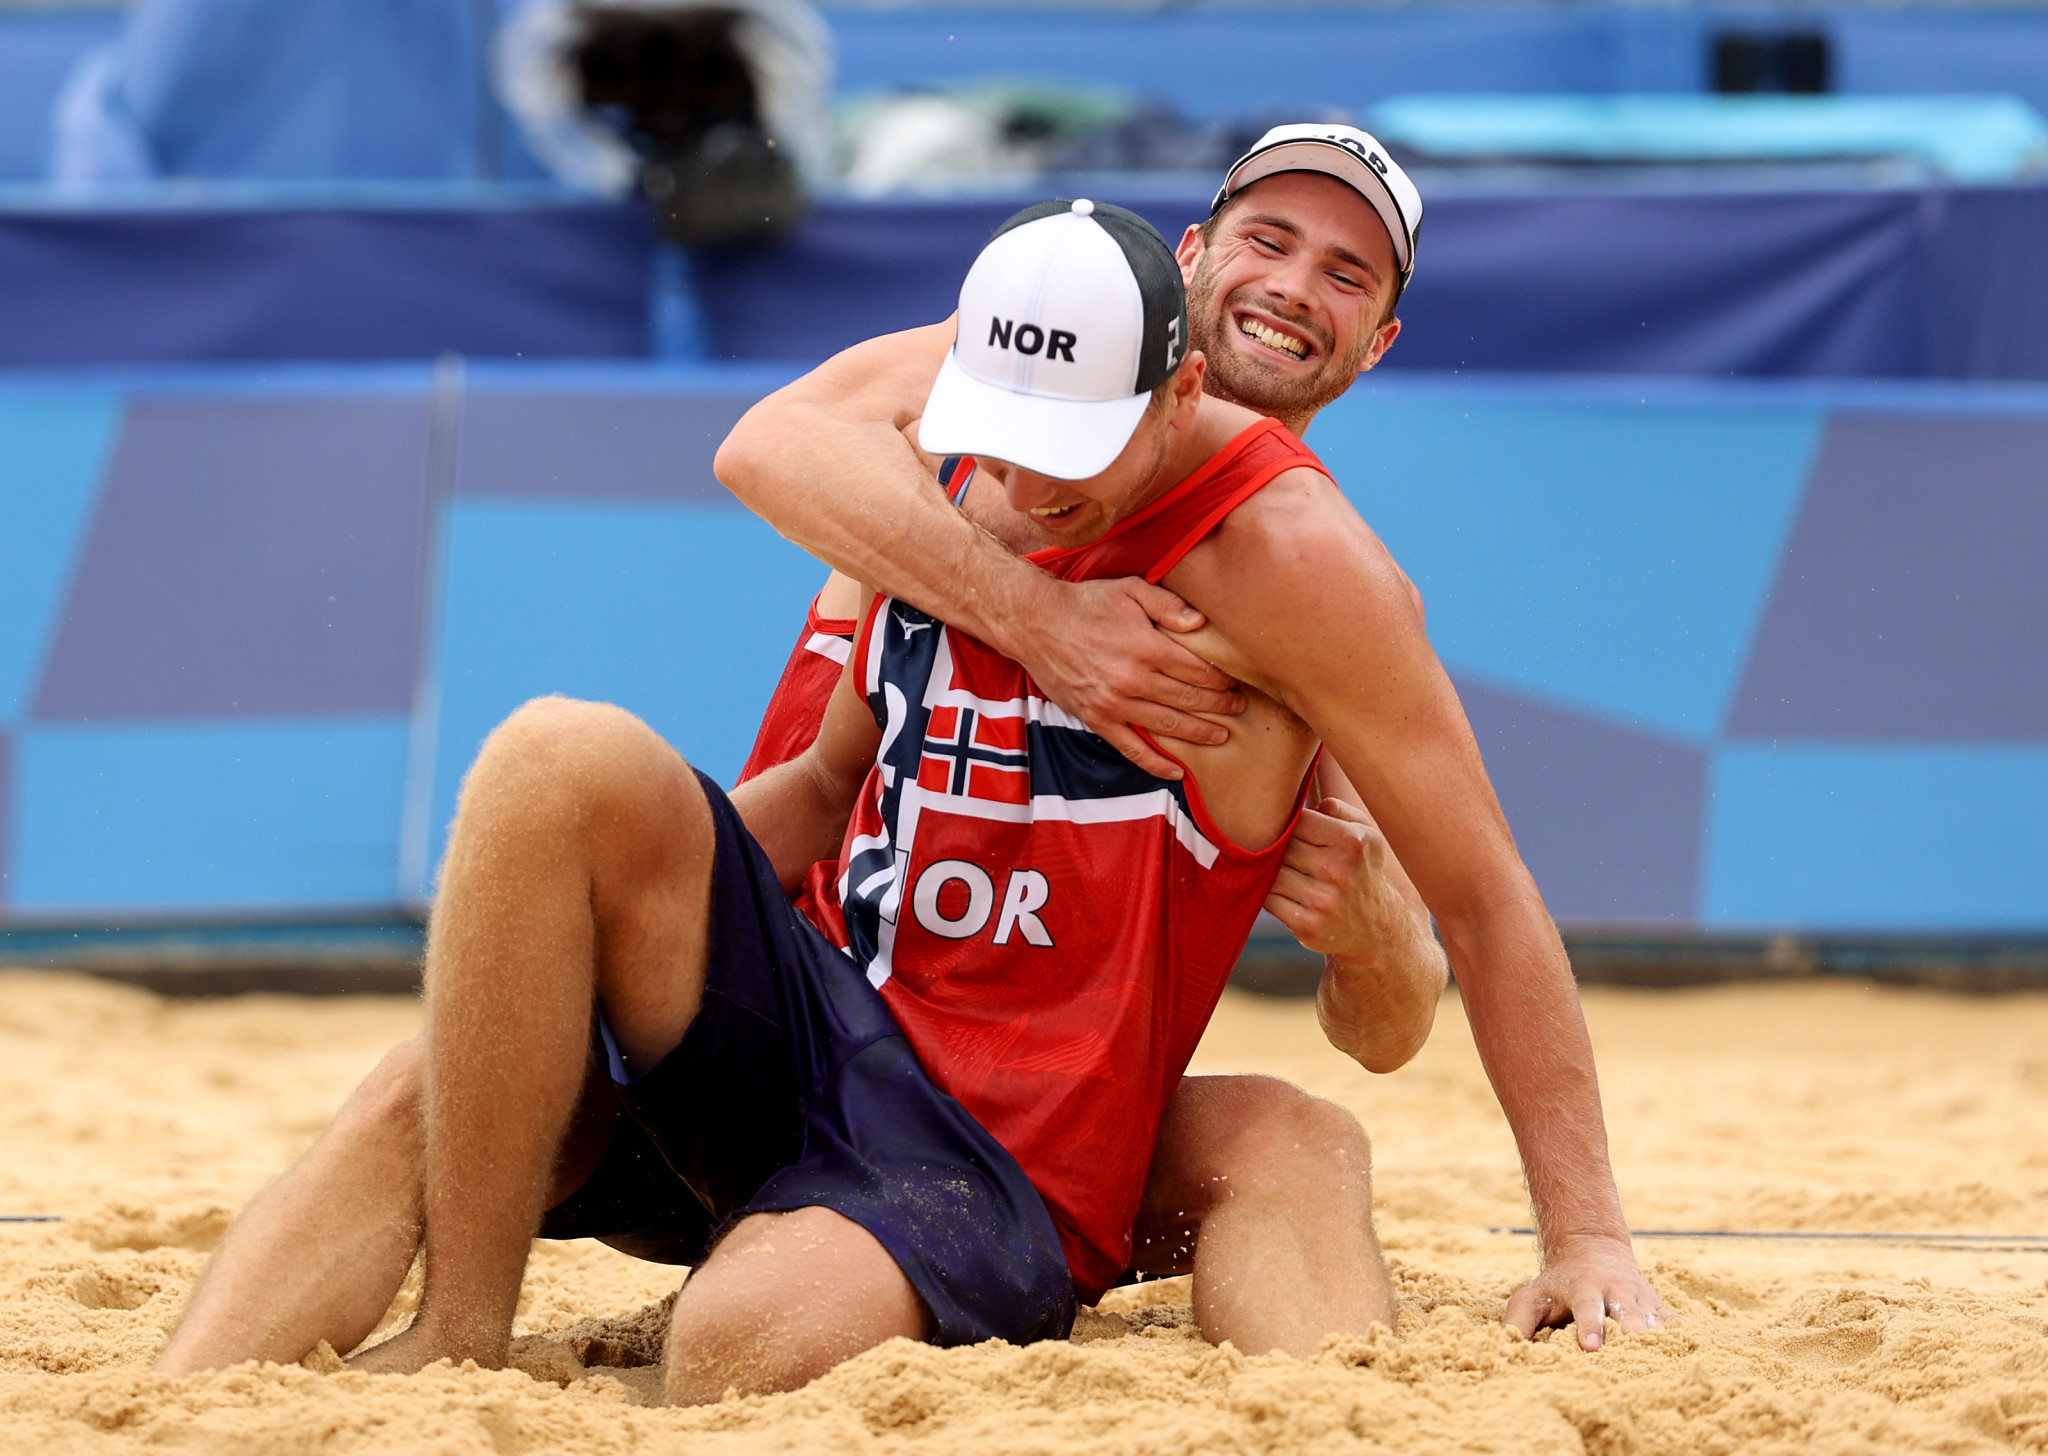 Anders Mol and Christian Sørum are through to the final after a brilliant comeback to defeat The Netherlands' Christiaan Varenhorst and Steven van de Velde in the semi-finals ©Getty Images